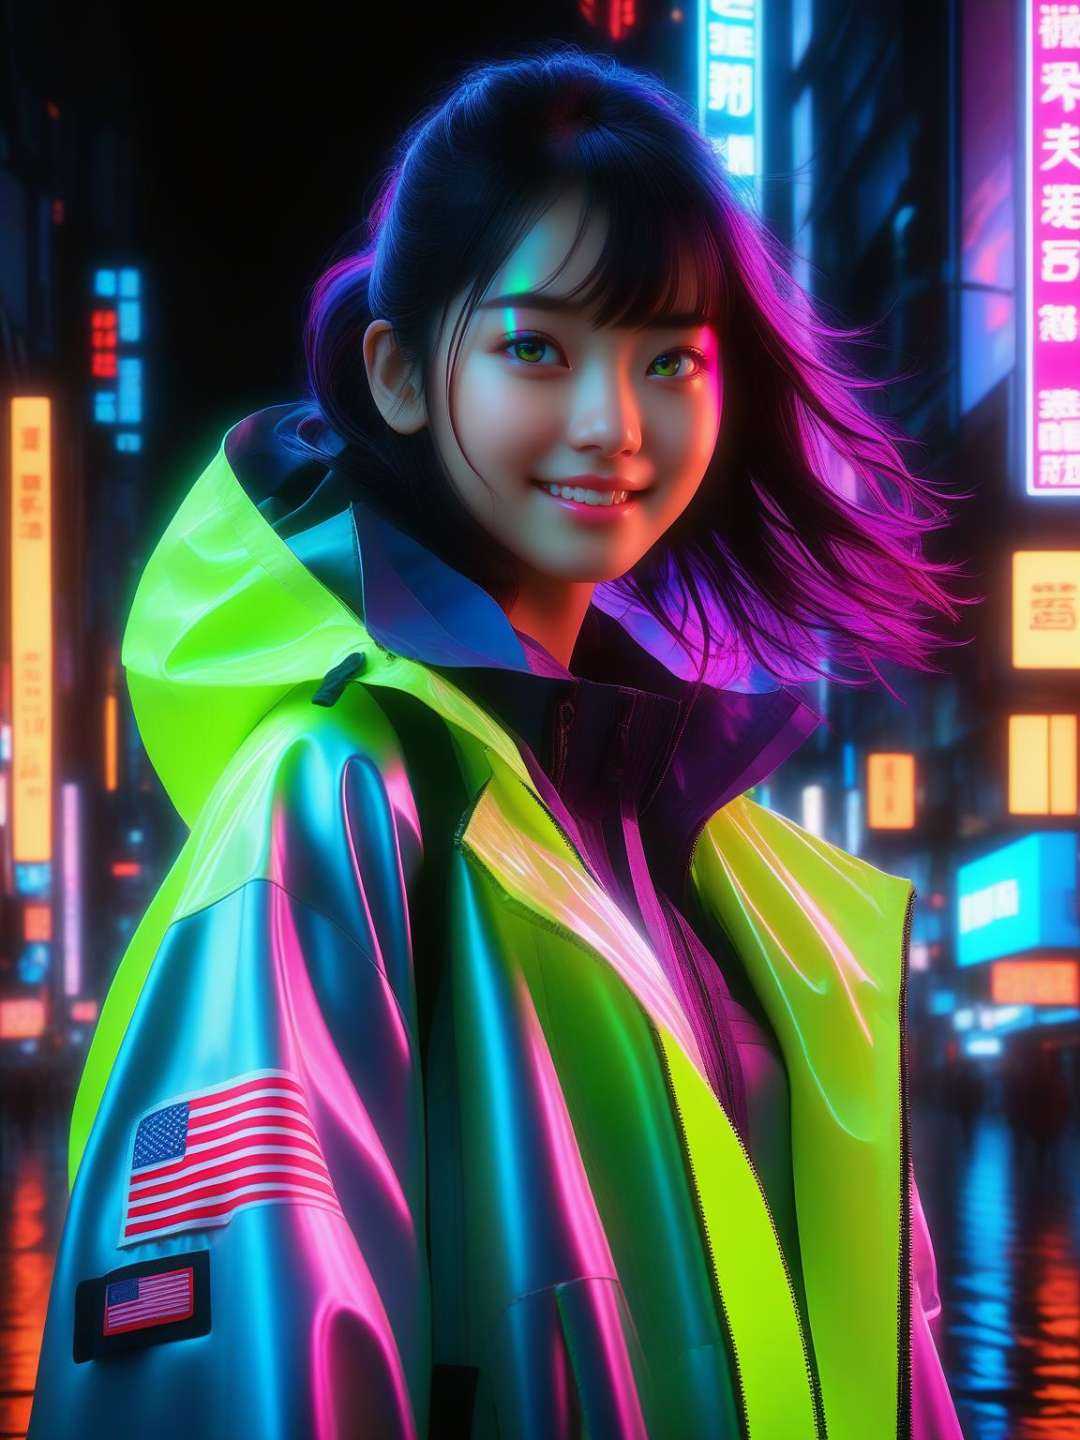 masterpiece, best quality, half body, portrait, night city, 1girl, anime, 3D, Japan, pixar, realistic, **** girl, smiling, cute face, harajuku fashion style, rain coat, beautiful, colourful, neon lights, cyberpunk, smooth skin, illustration, by stanley artgerm lau, sideways glance, foreshortening, extremely detailed 8K, smooth, high resolution, ultra quality, highly detail eyes, highly detail mouth, highly detailed face, perfect eyes, both eyes are the same, glare, Iridescent, Global illumination, hd, 8k realistic light and shadow, bright Eyes, fluorescent eyes, 